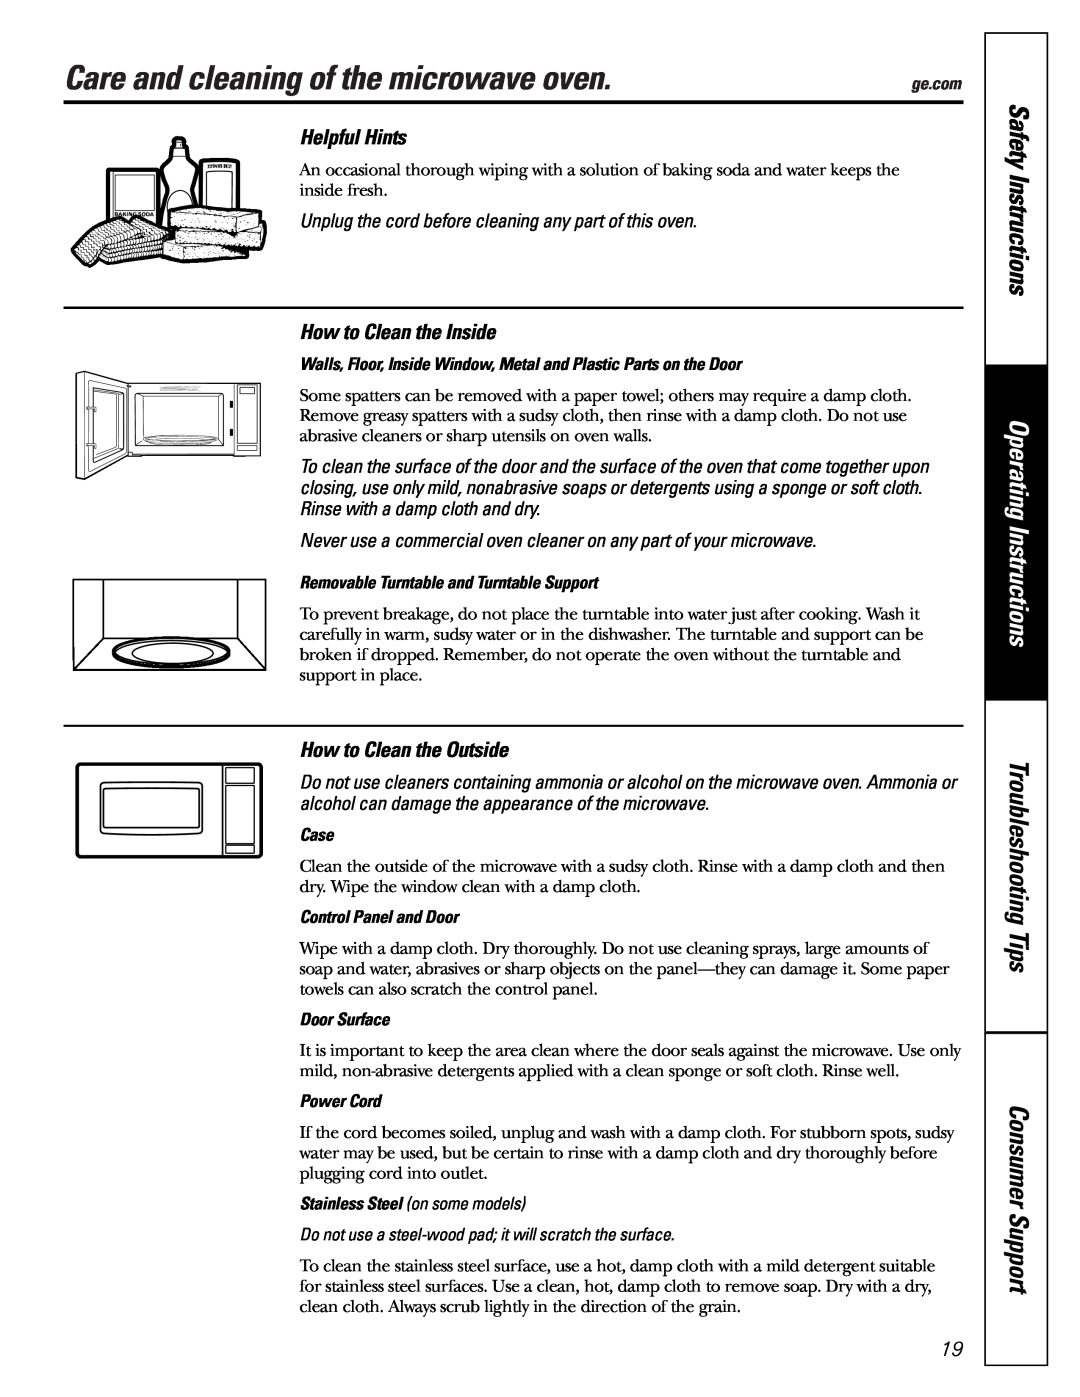 GE JES1142 owner manual Care and cleaning of the microwave oven, Safety Instructions, Operating Instructions, Helpful Hints 